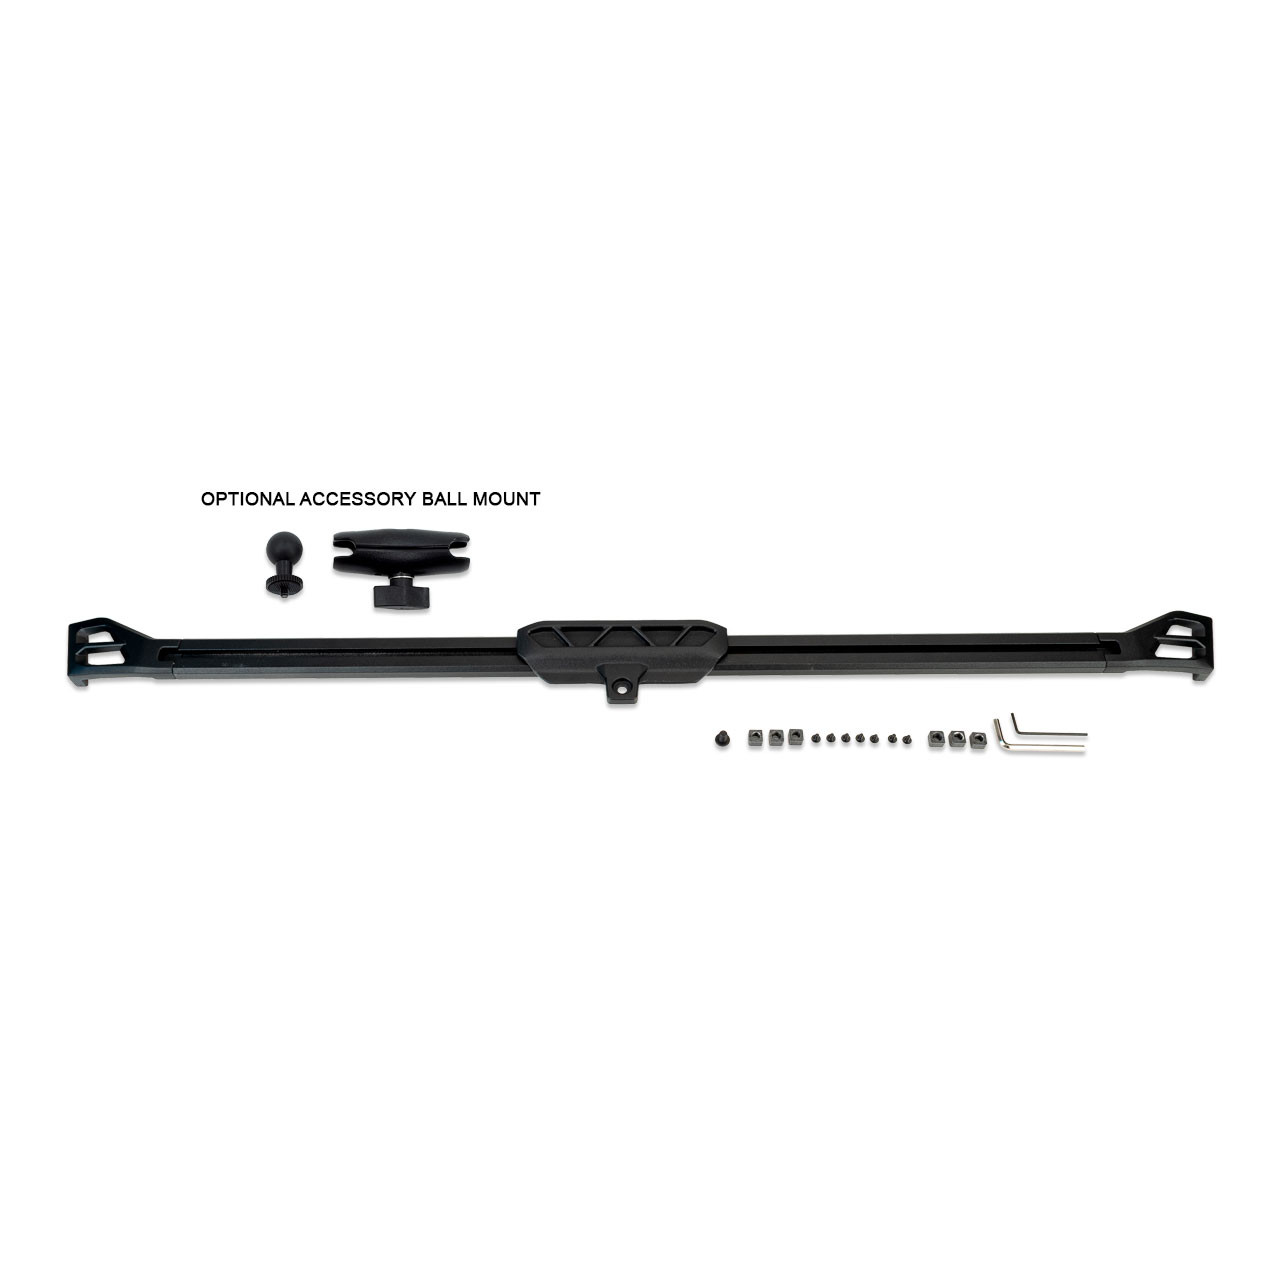 IAG I-Line Full Length Dash Mount Rail System 2021+ Ford Bronco - Parts Layout with Accessory Ball Mount